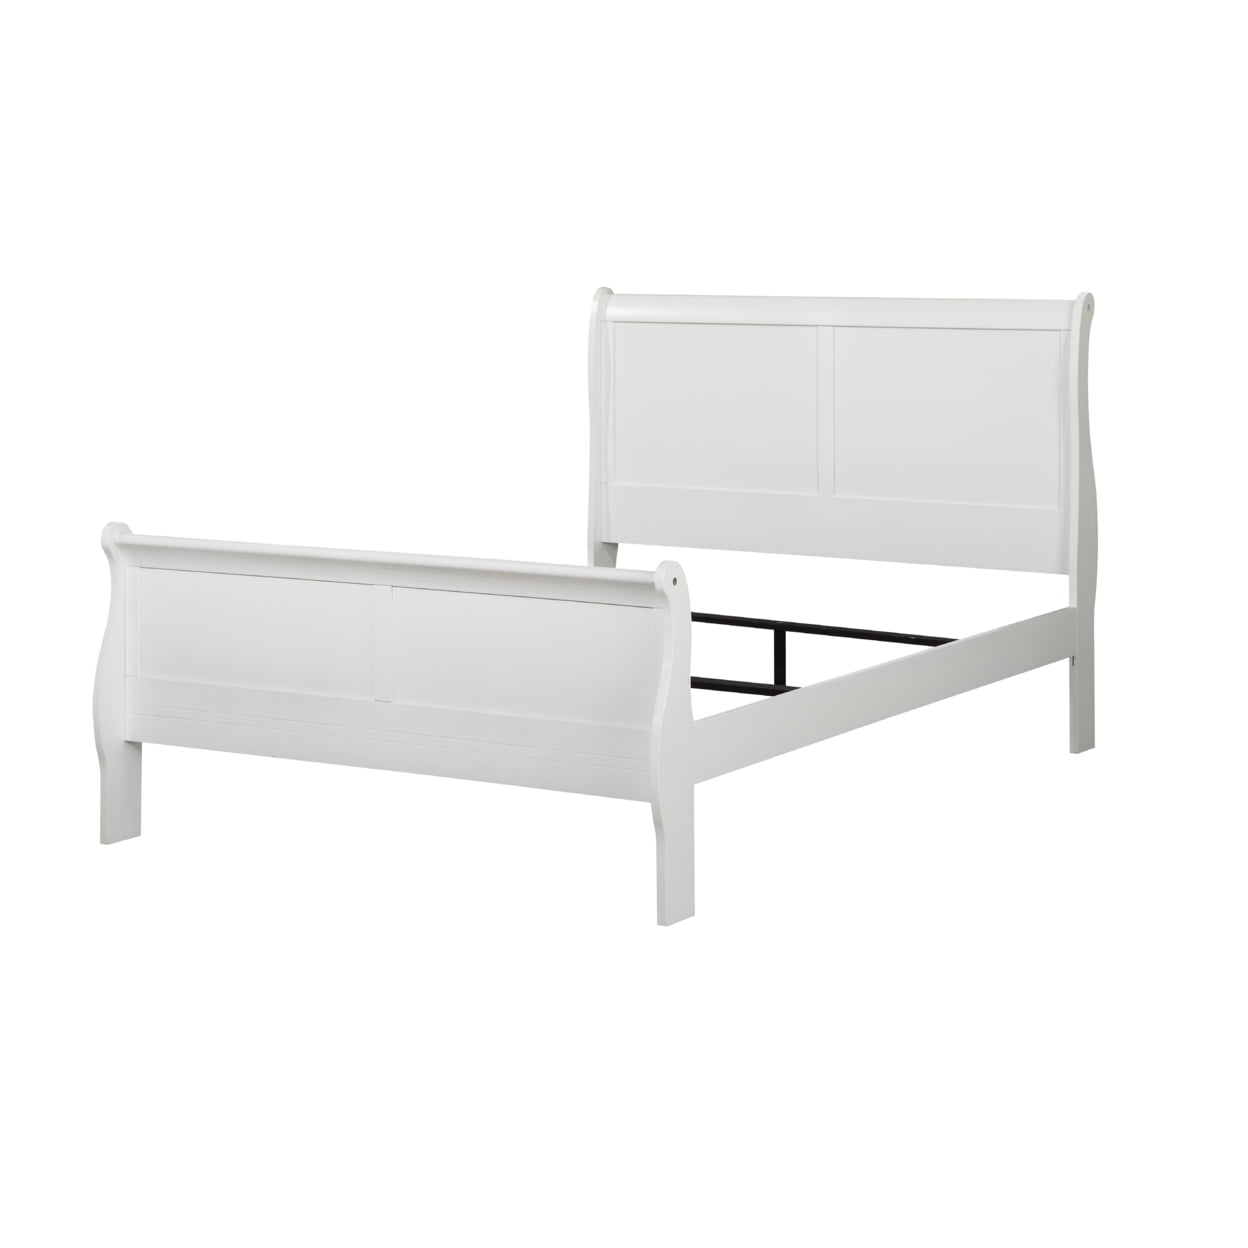 BM220336 Wooden Full Size Bed with Panel Design Sleigh Headboard & Footboard, White -  Benjara